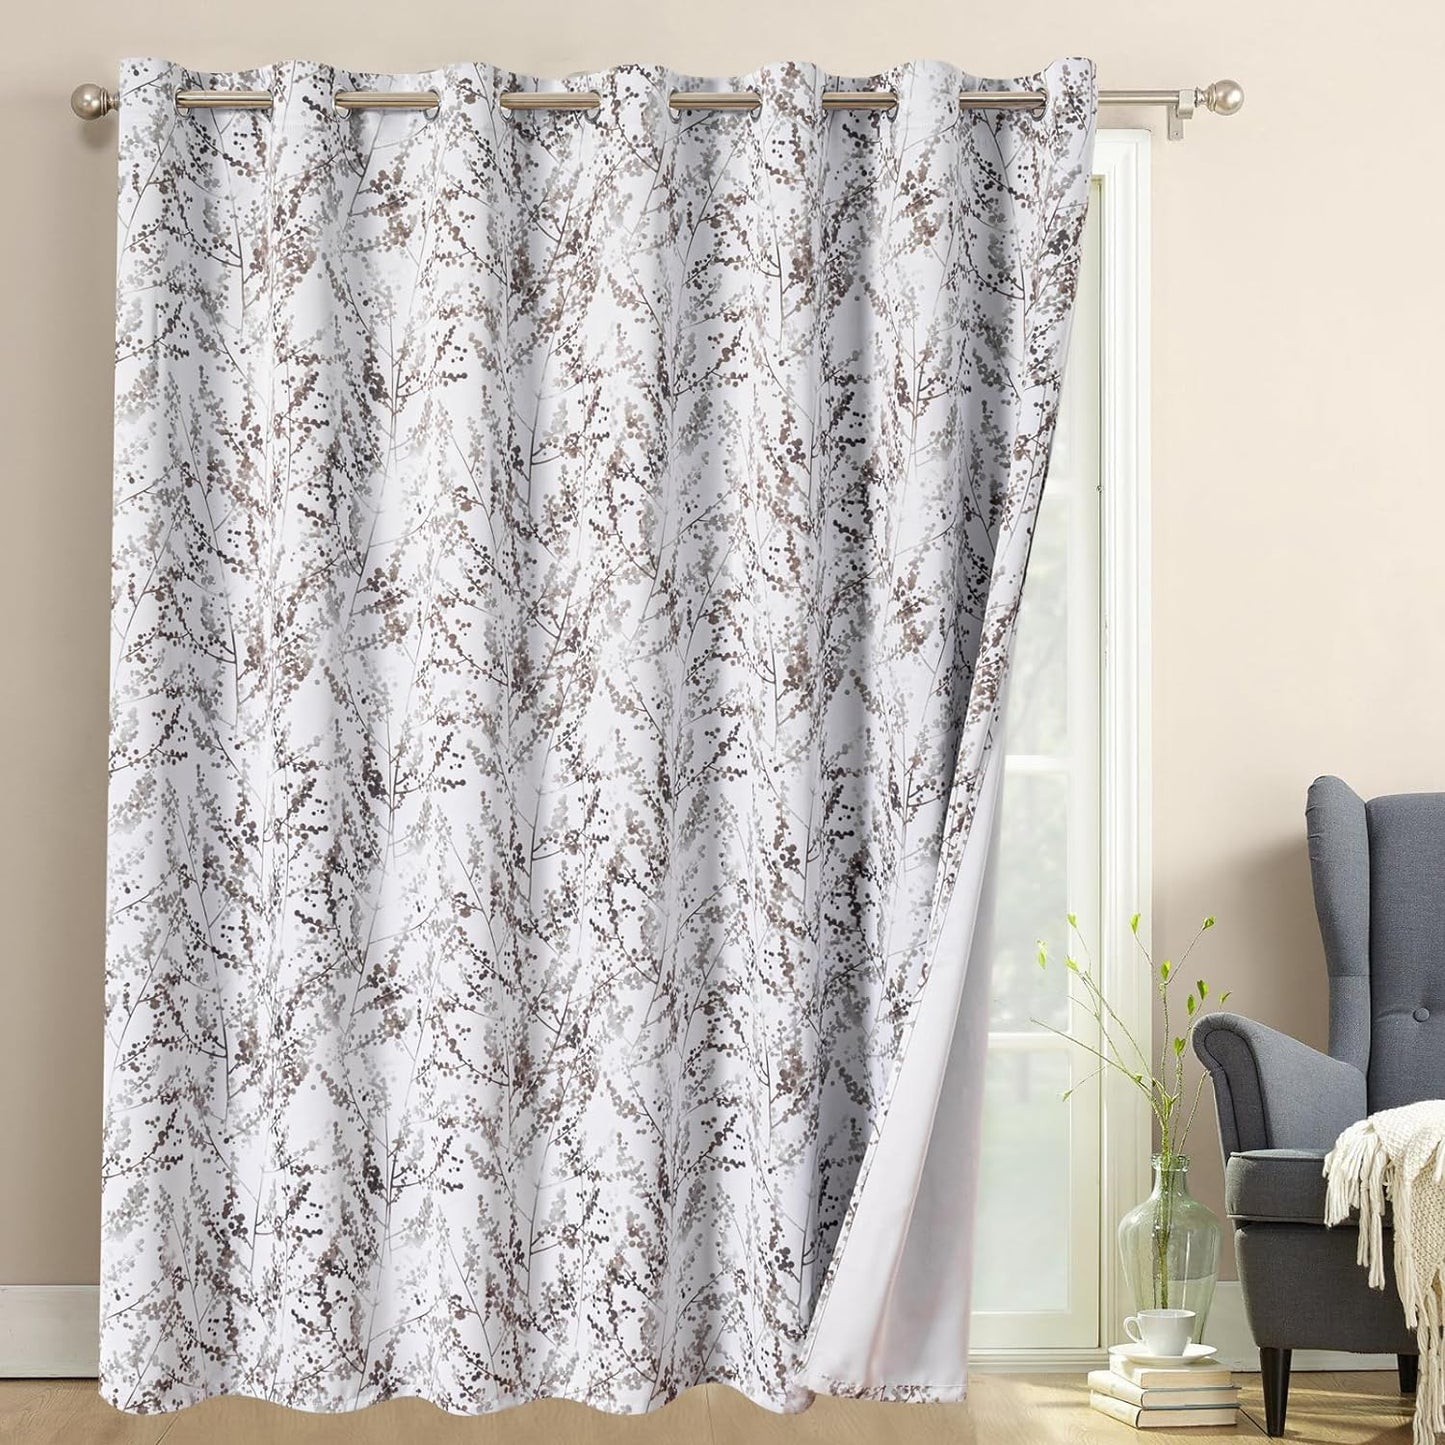 MYSKY HOME Living Room Curtains 84 Inches Long Thermal Insulated Room Darkening Curtains for Dining Room Patio Leaf Pattern Grommet Drapes for Bedroom, Sage, 2 Pieces  MYSKY HOME Branch-Brown 100"W X 84"L 